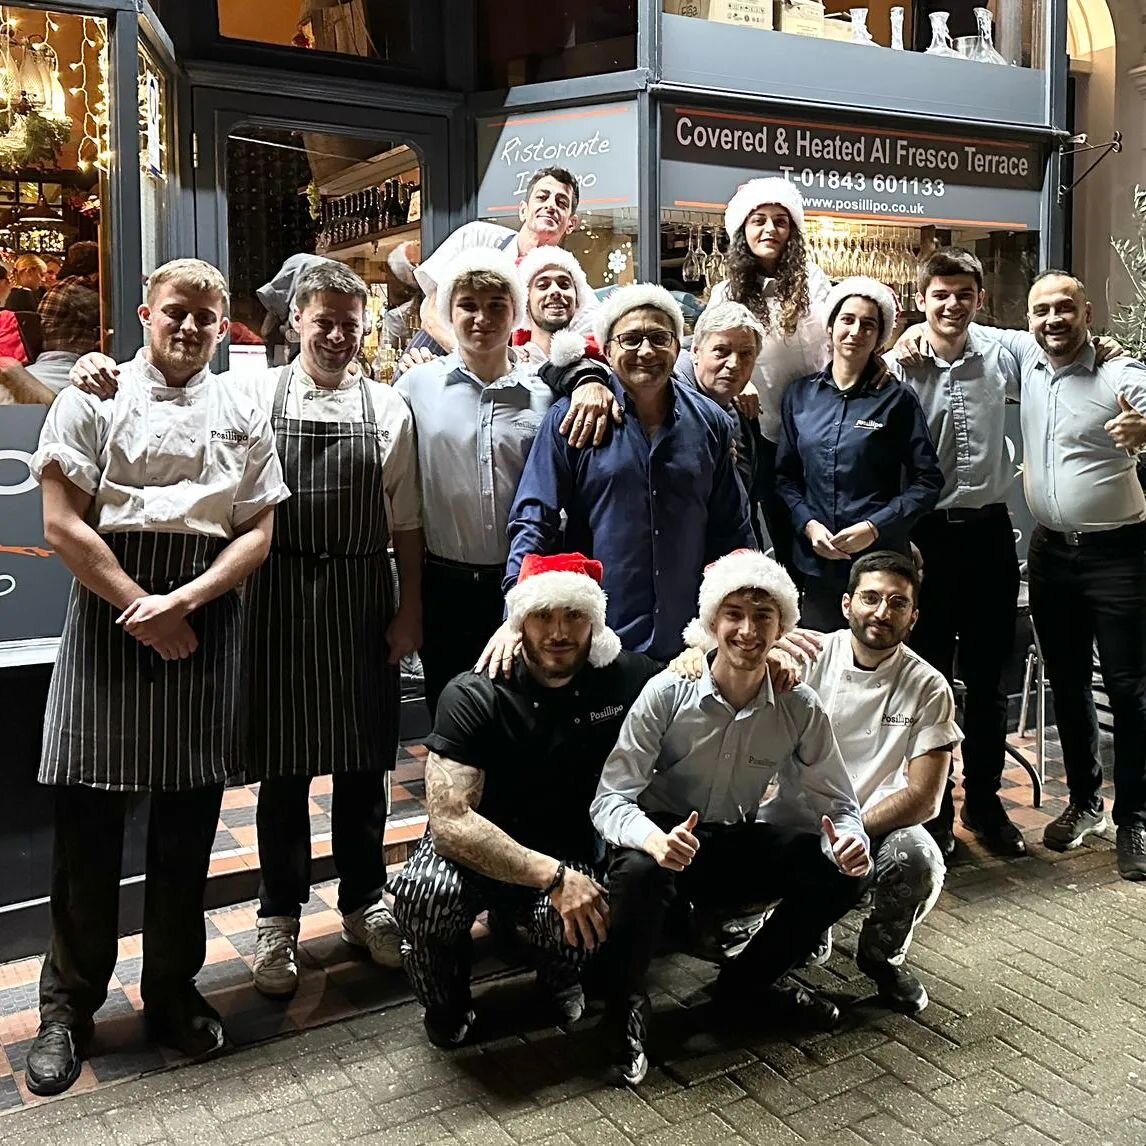 Merry Christmas from Broadstairs 😊#posilliporestaurant #italianrestaurant #christmas #christmasparty #natale #natale #goodfood #italianstyle #italianchristmas #italianrestaurants #christmasmenu #christmasdrinks #christmasdinner